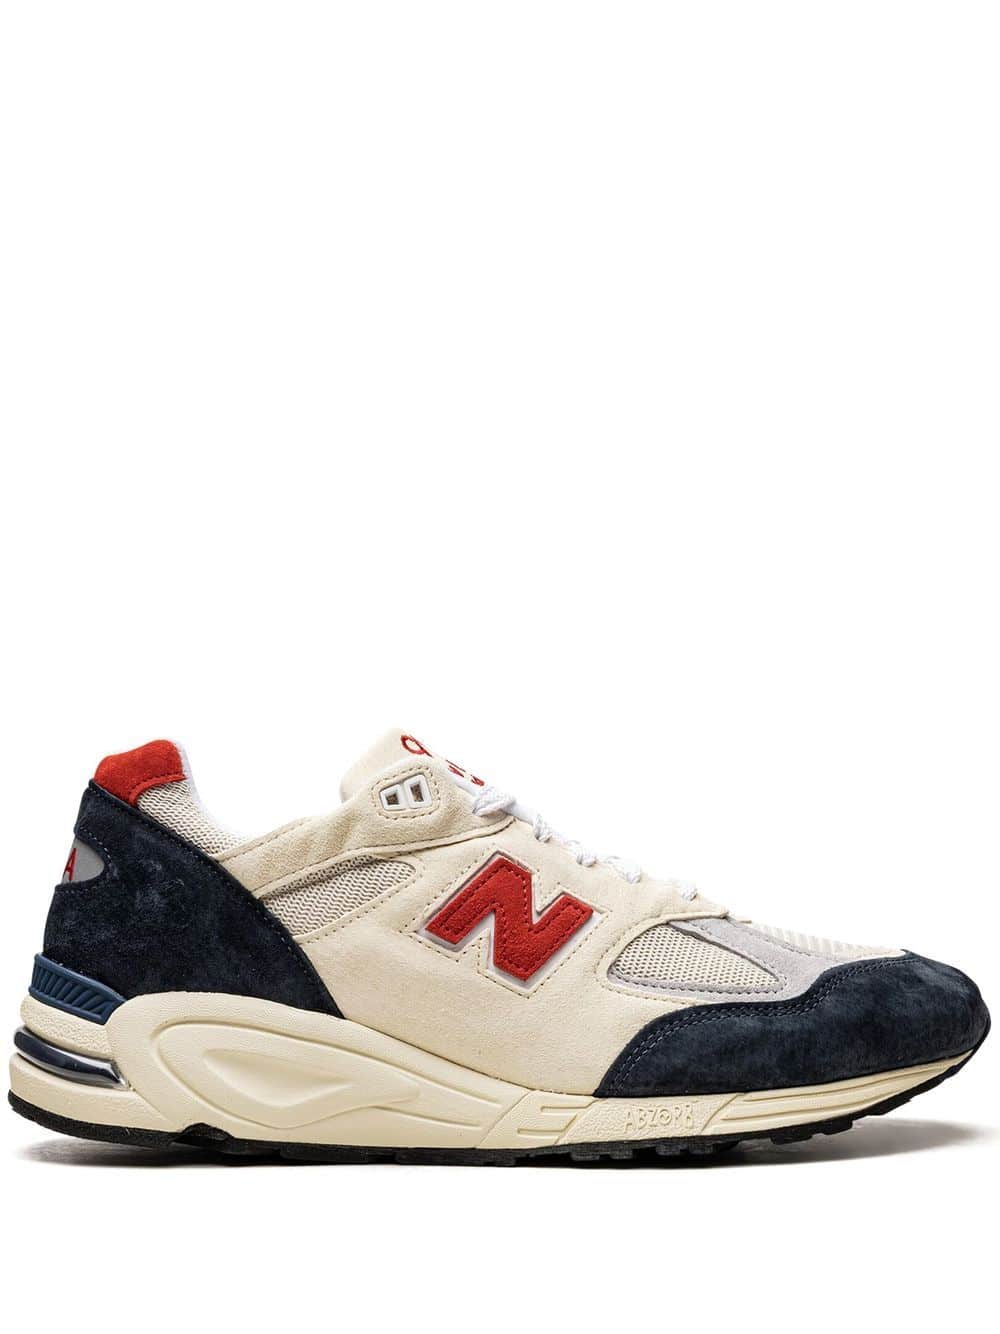 New Balance "990 V2 ""Made in the USA"" sneakers" - Blauw